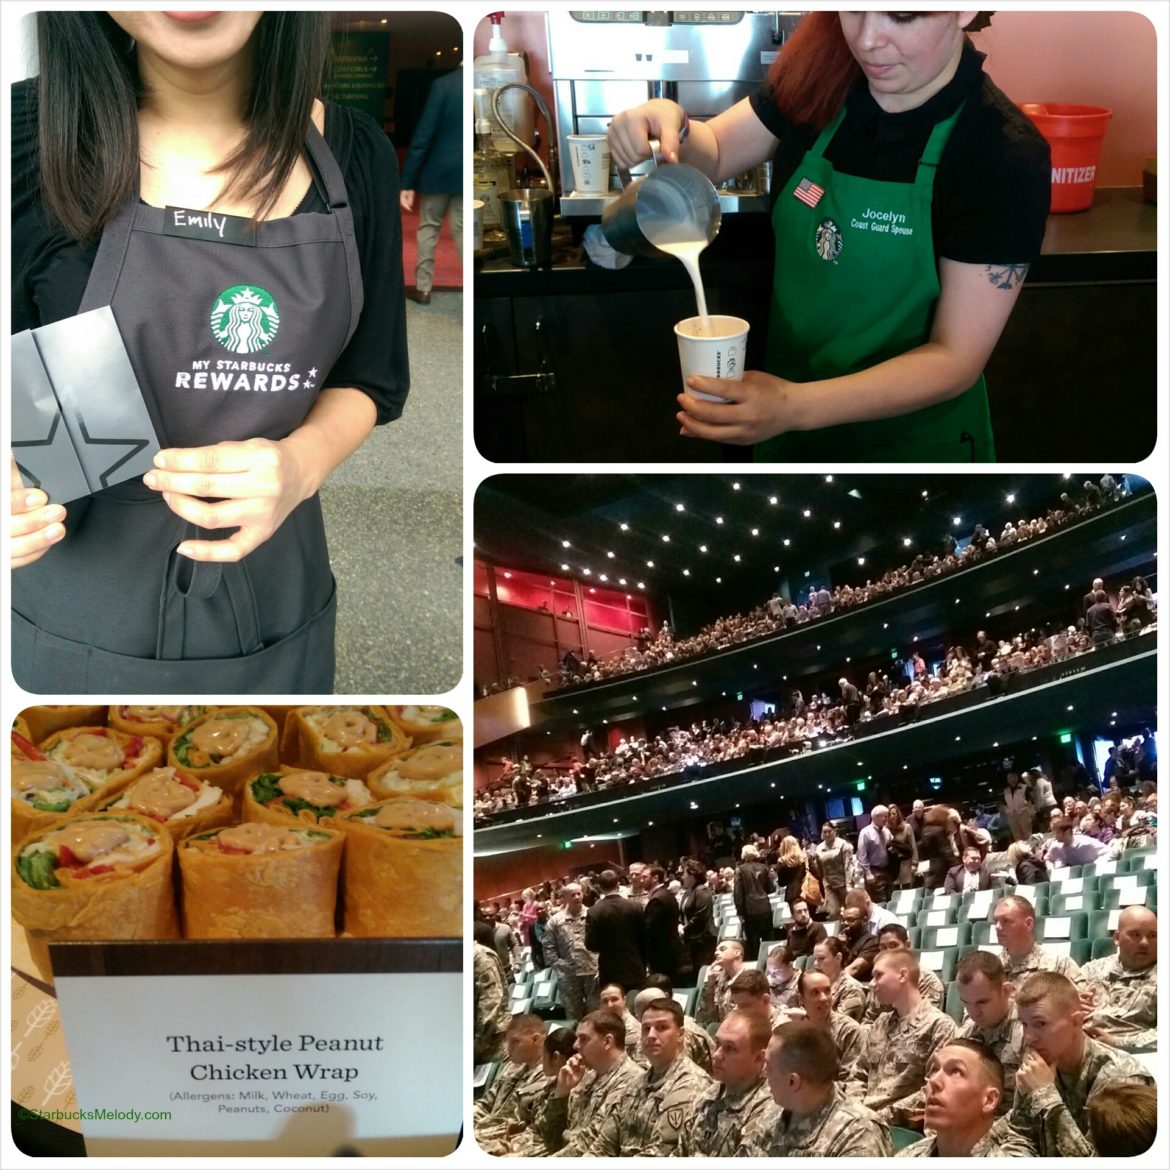 Starbucks Annual Meeting: New Food; Common; Mellody Hobson and More.